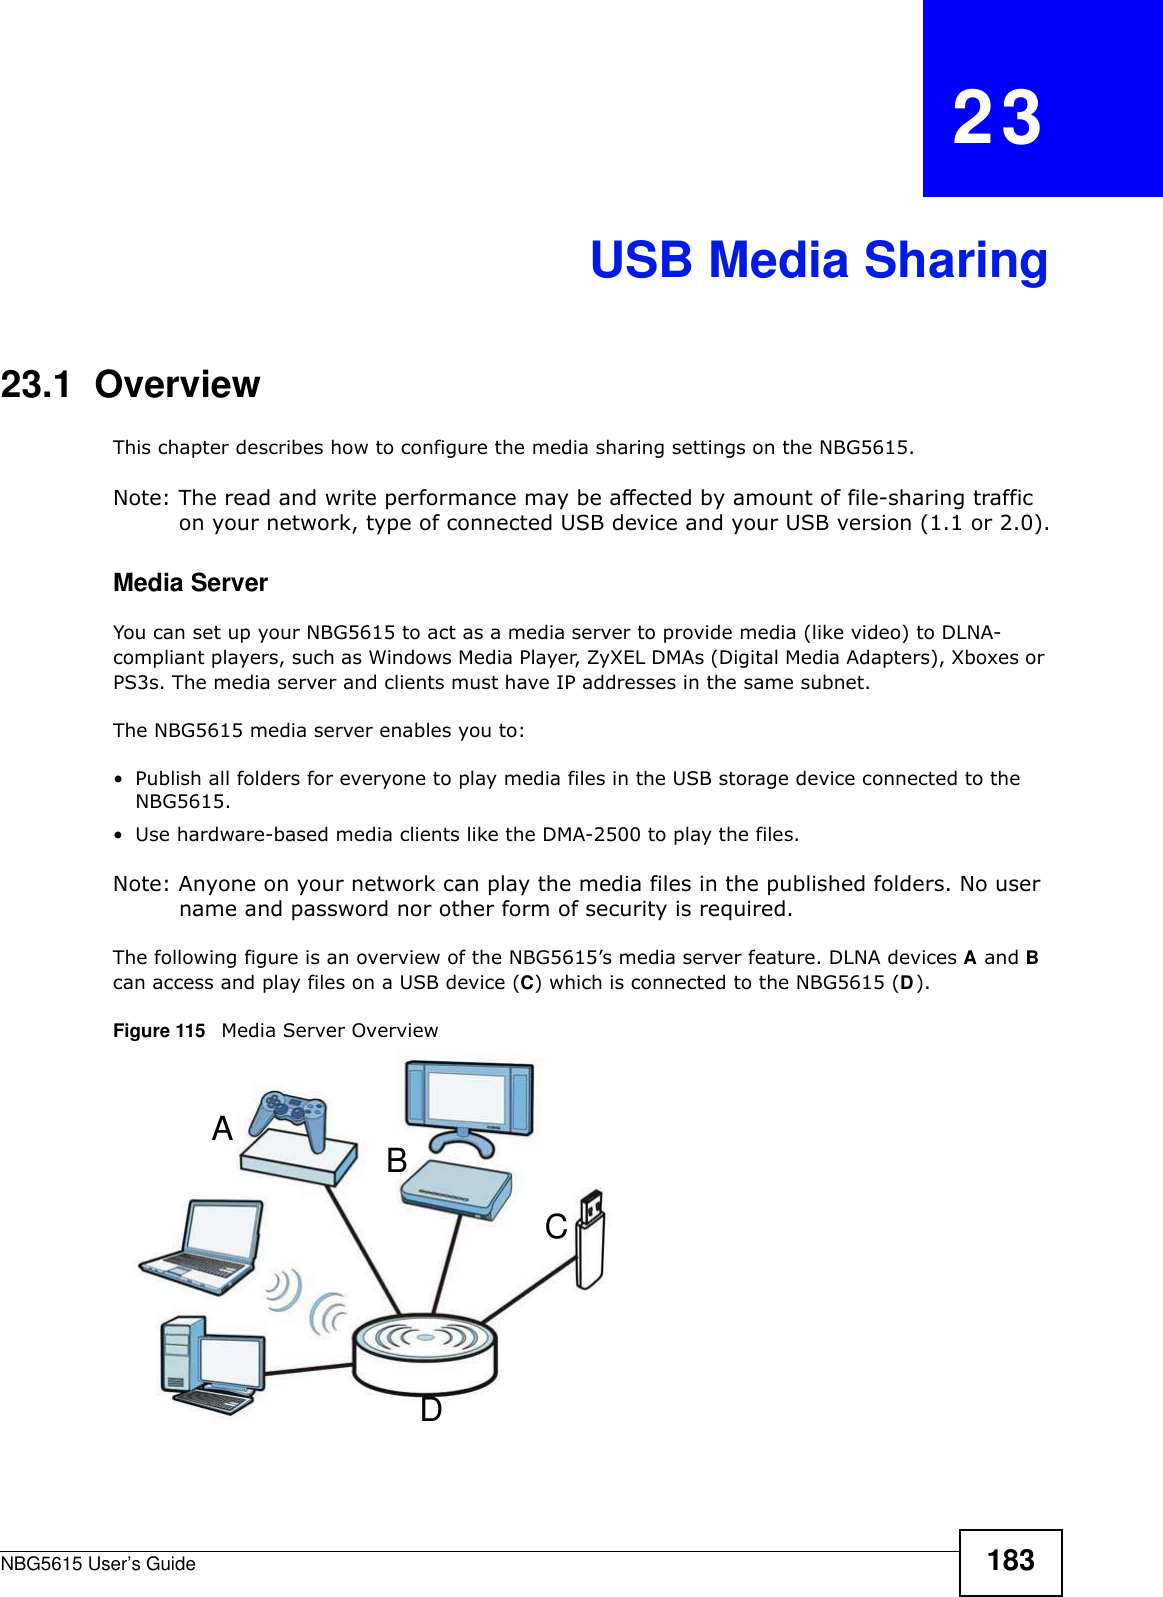 NBG5615 User’s Guide 183CHAPTER   23USB Media Sharing23.1  OverviewThis chapter describes how to configure the media sharing settings on the NBG5615.Note: The read and write performance may be affected by amount of file-sharing traffic on your network, type of connected USB device and your USB version (1.1 or 2.0).Media ServerYou can set up your NBG5615 to act as a media server to provide media (like video) to DLNA-compliant players, such as Windows Media Player, ZyXEL DMAs (Digital Media Adapters), Xboxes or PS3s. The media server and clients must have IP addresses in the same subnet.The NBG5615 media server enables you to:• Publish all folders for everyone to play media files in the USB storage device connected to the NBG5615.• Use hardware-based media clients like the DMA-2500 to play the files.Note: Anyone on your network can play the media files in the published folders. No user name and password nor other form of security is required. The following figure is an overview of the NBG5615’s media server feature. DLNA devices A and B can access and play files on a USB device (C) which is connected to the NBG5615 (D).Figure 115   Media Server OverviewABCD